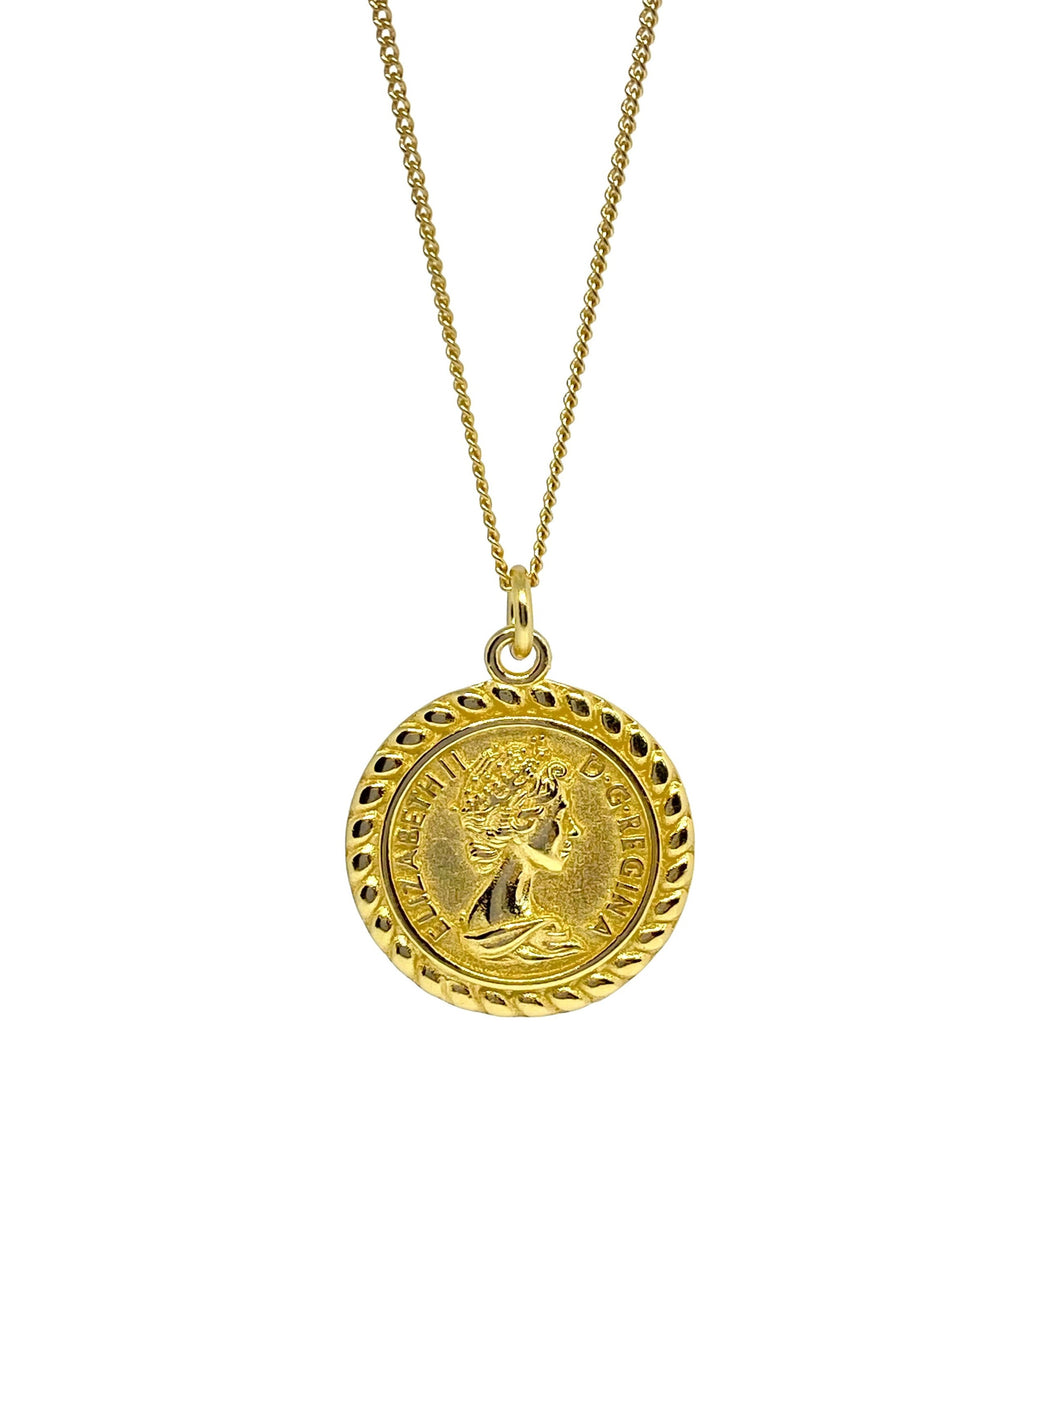 18 karat gold plated silver coin pendant necklace with queen Elizabeth in the middle